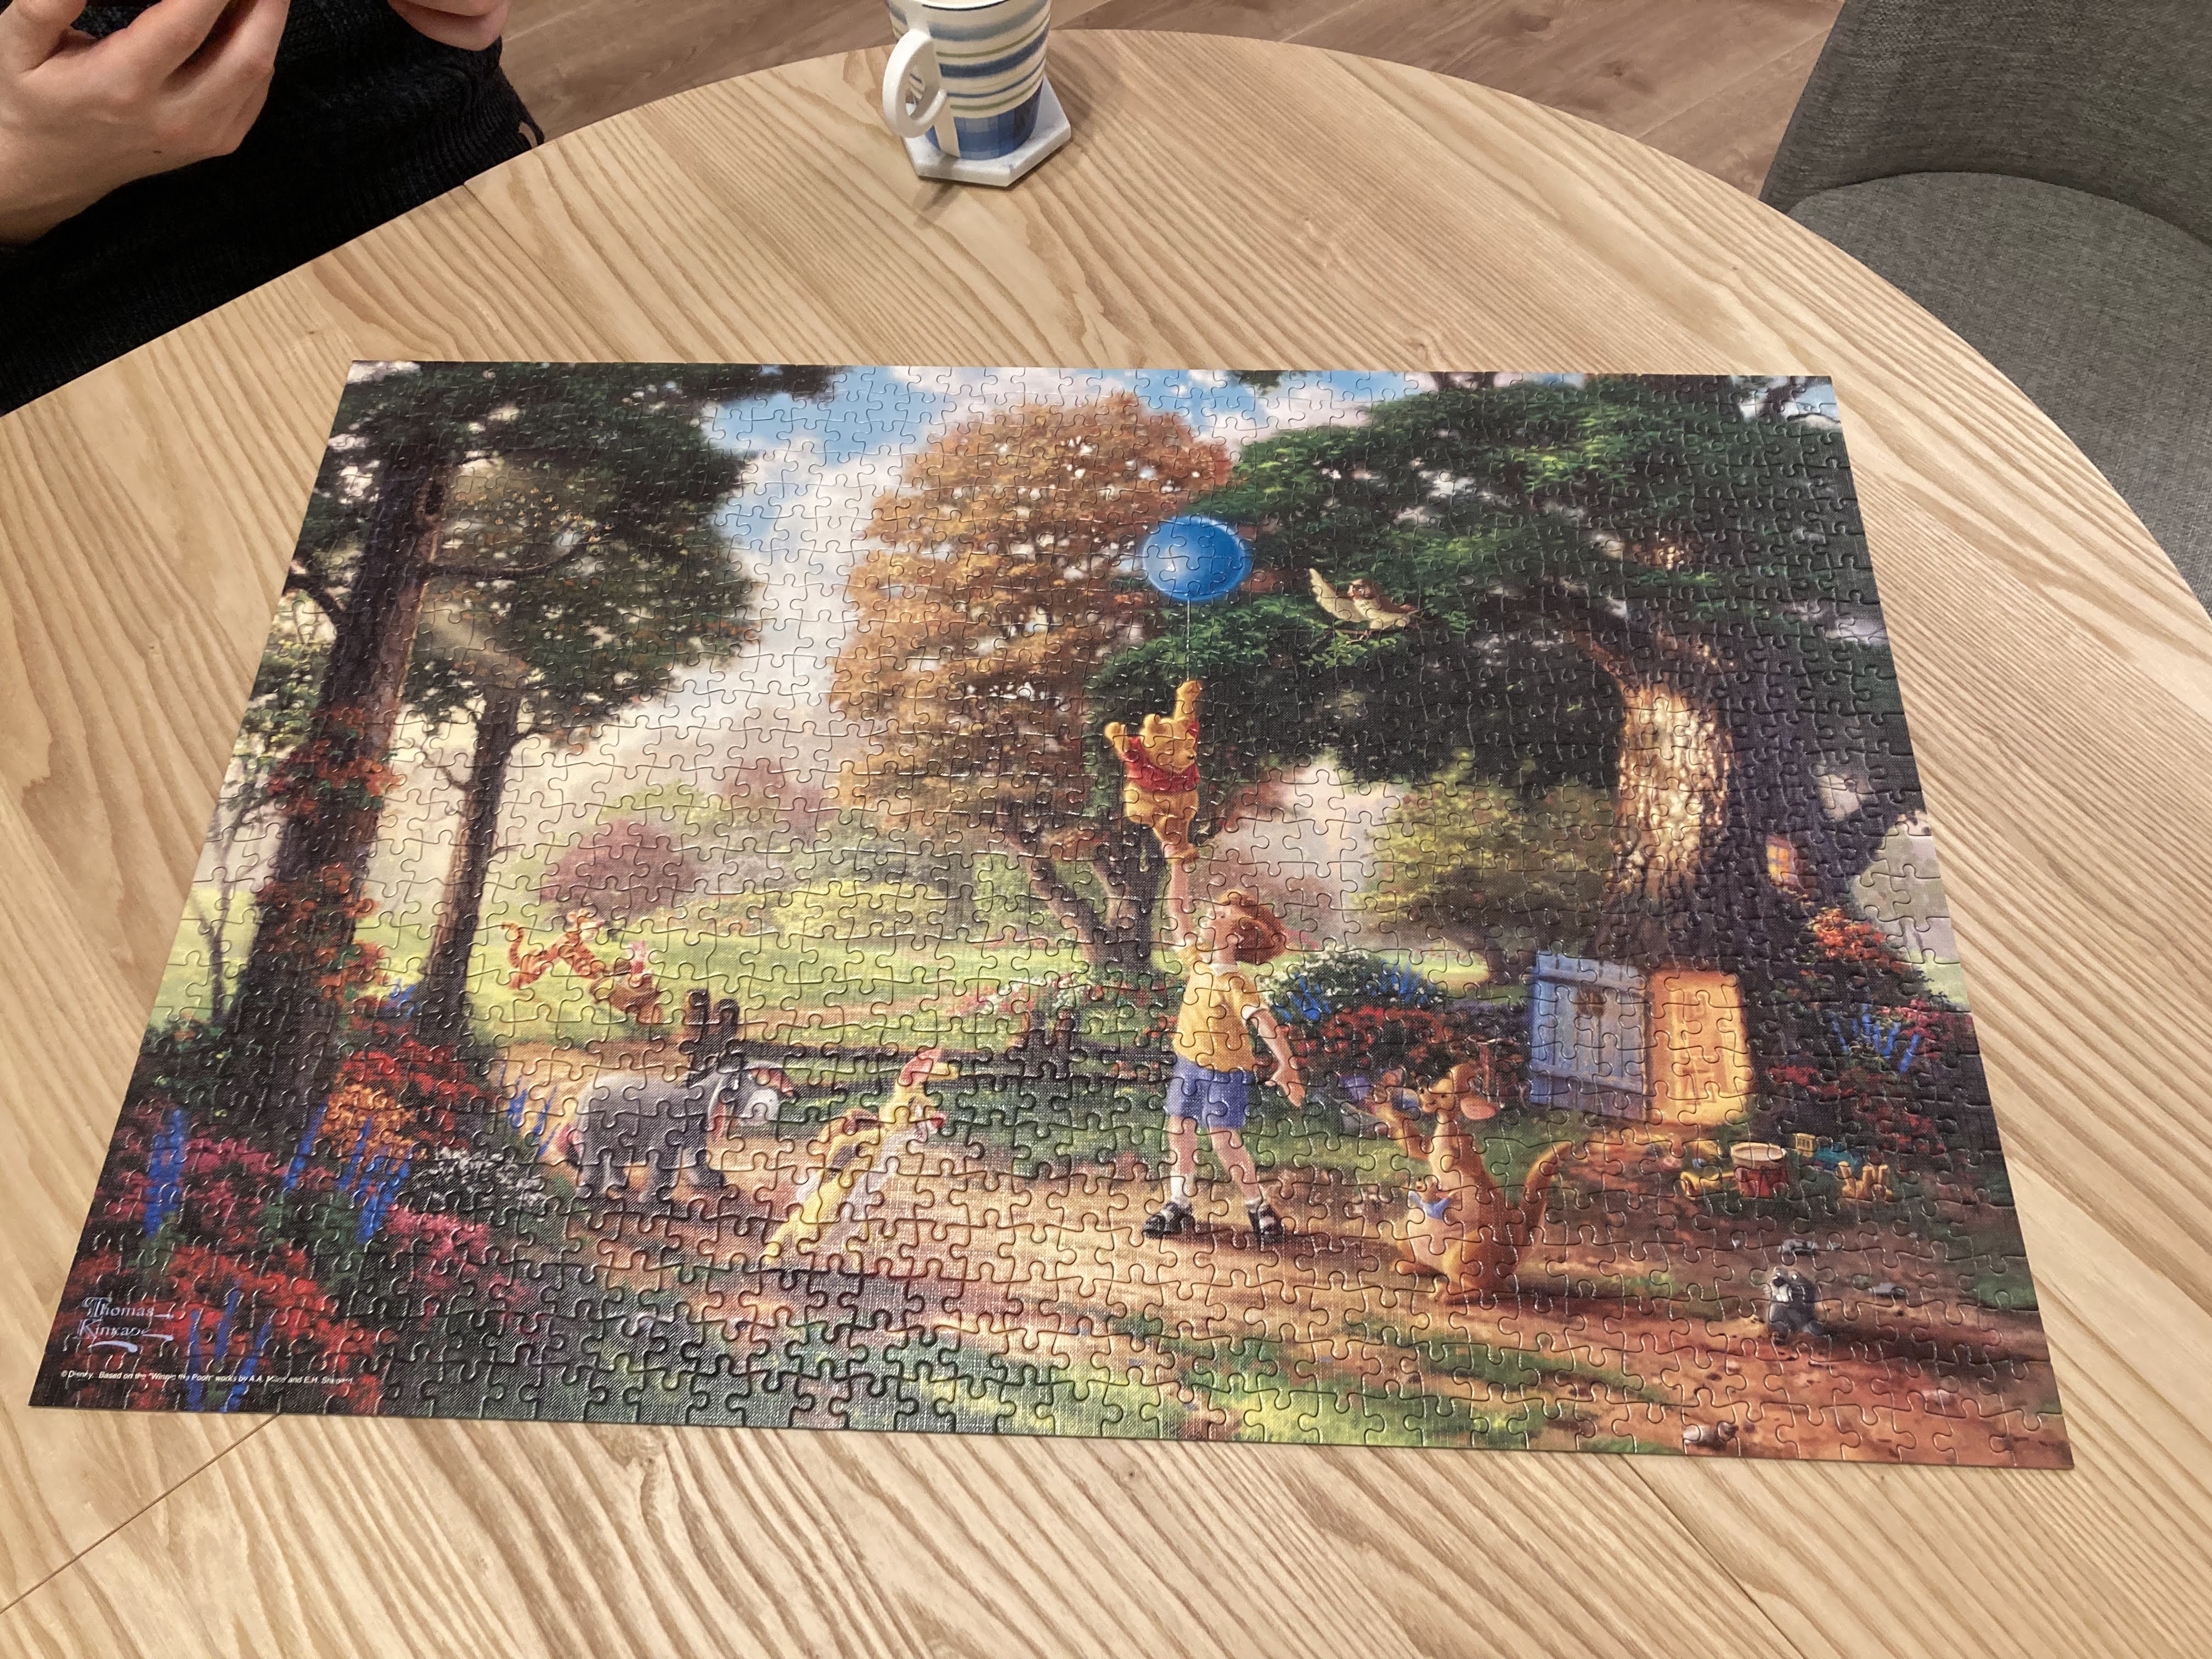 completed puzzle of Winnie the Pooh and friends